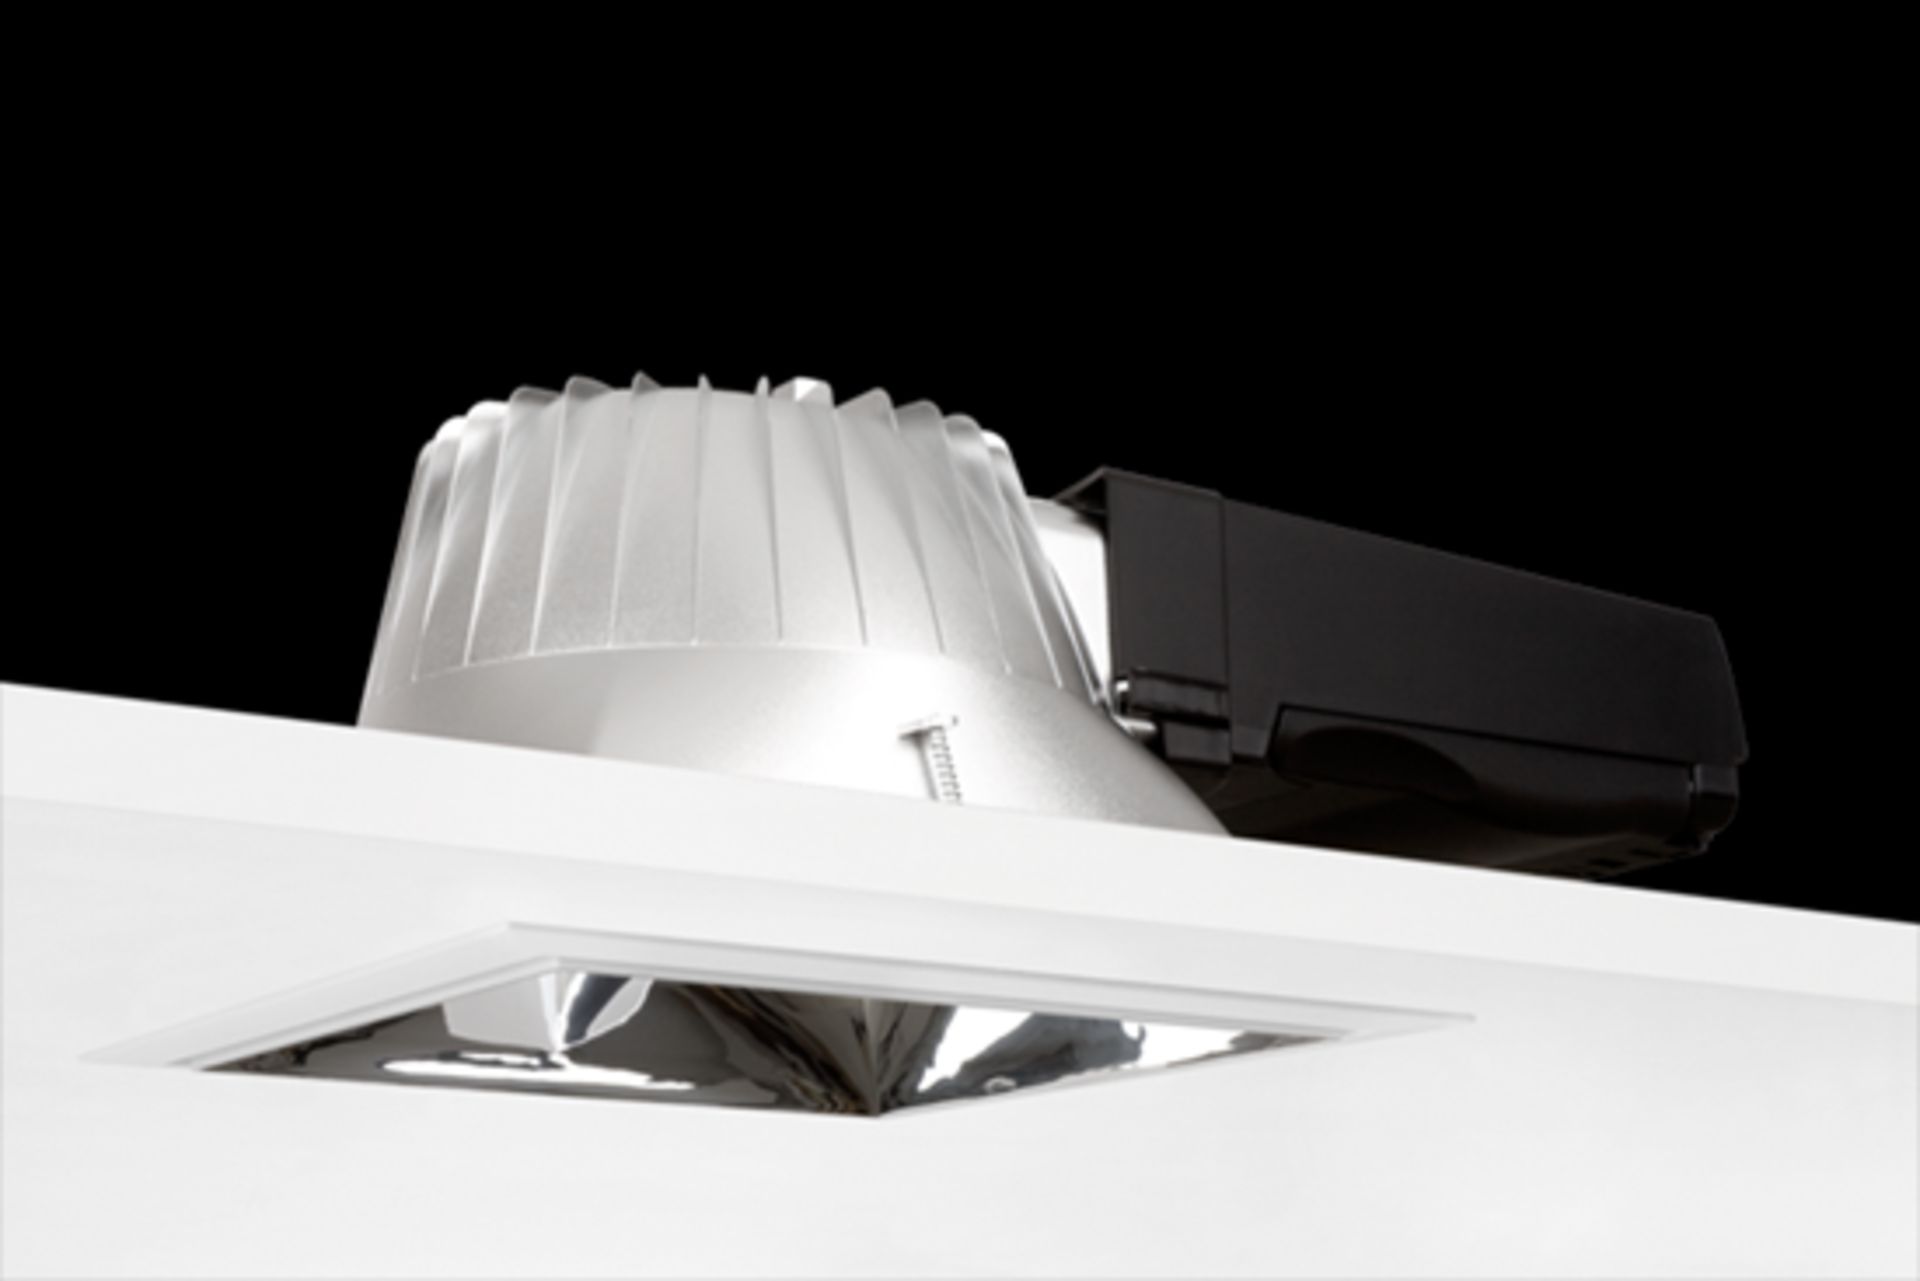 V Brand New Glamox D20 MRQ210 is a recessed square shaped downlight for compact lamps In A Box Brand - Image 2 of 2